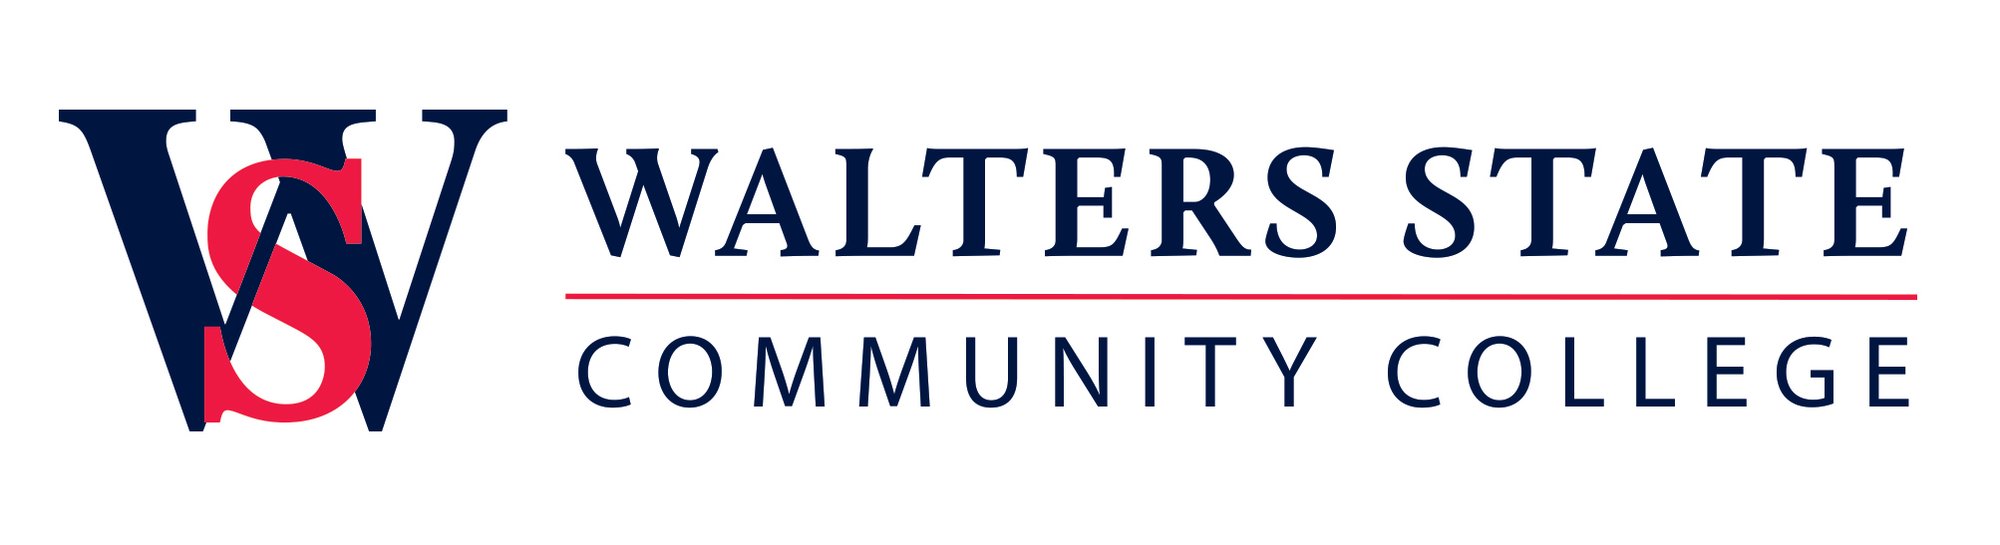 Walters State Community College Logo